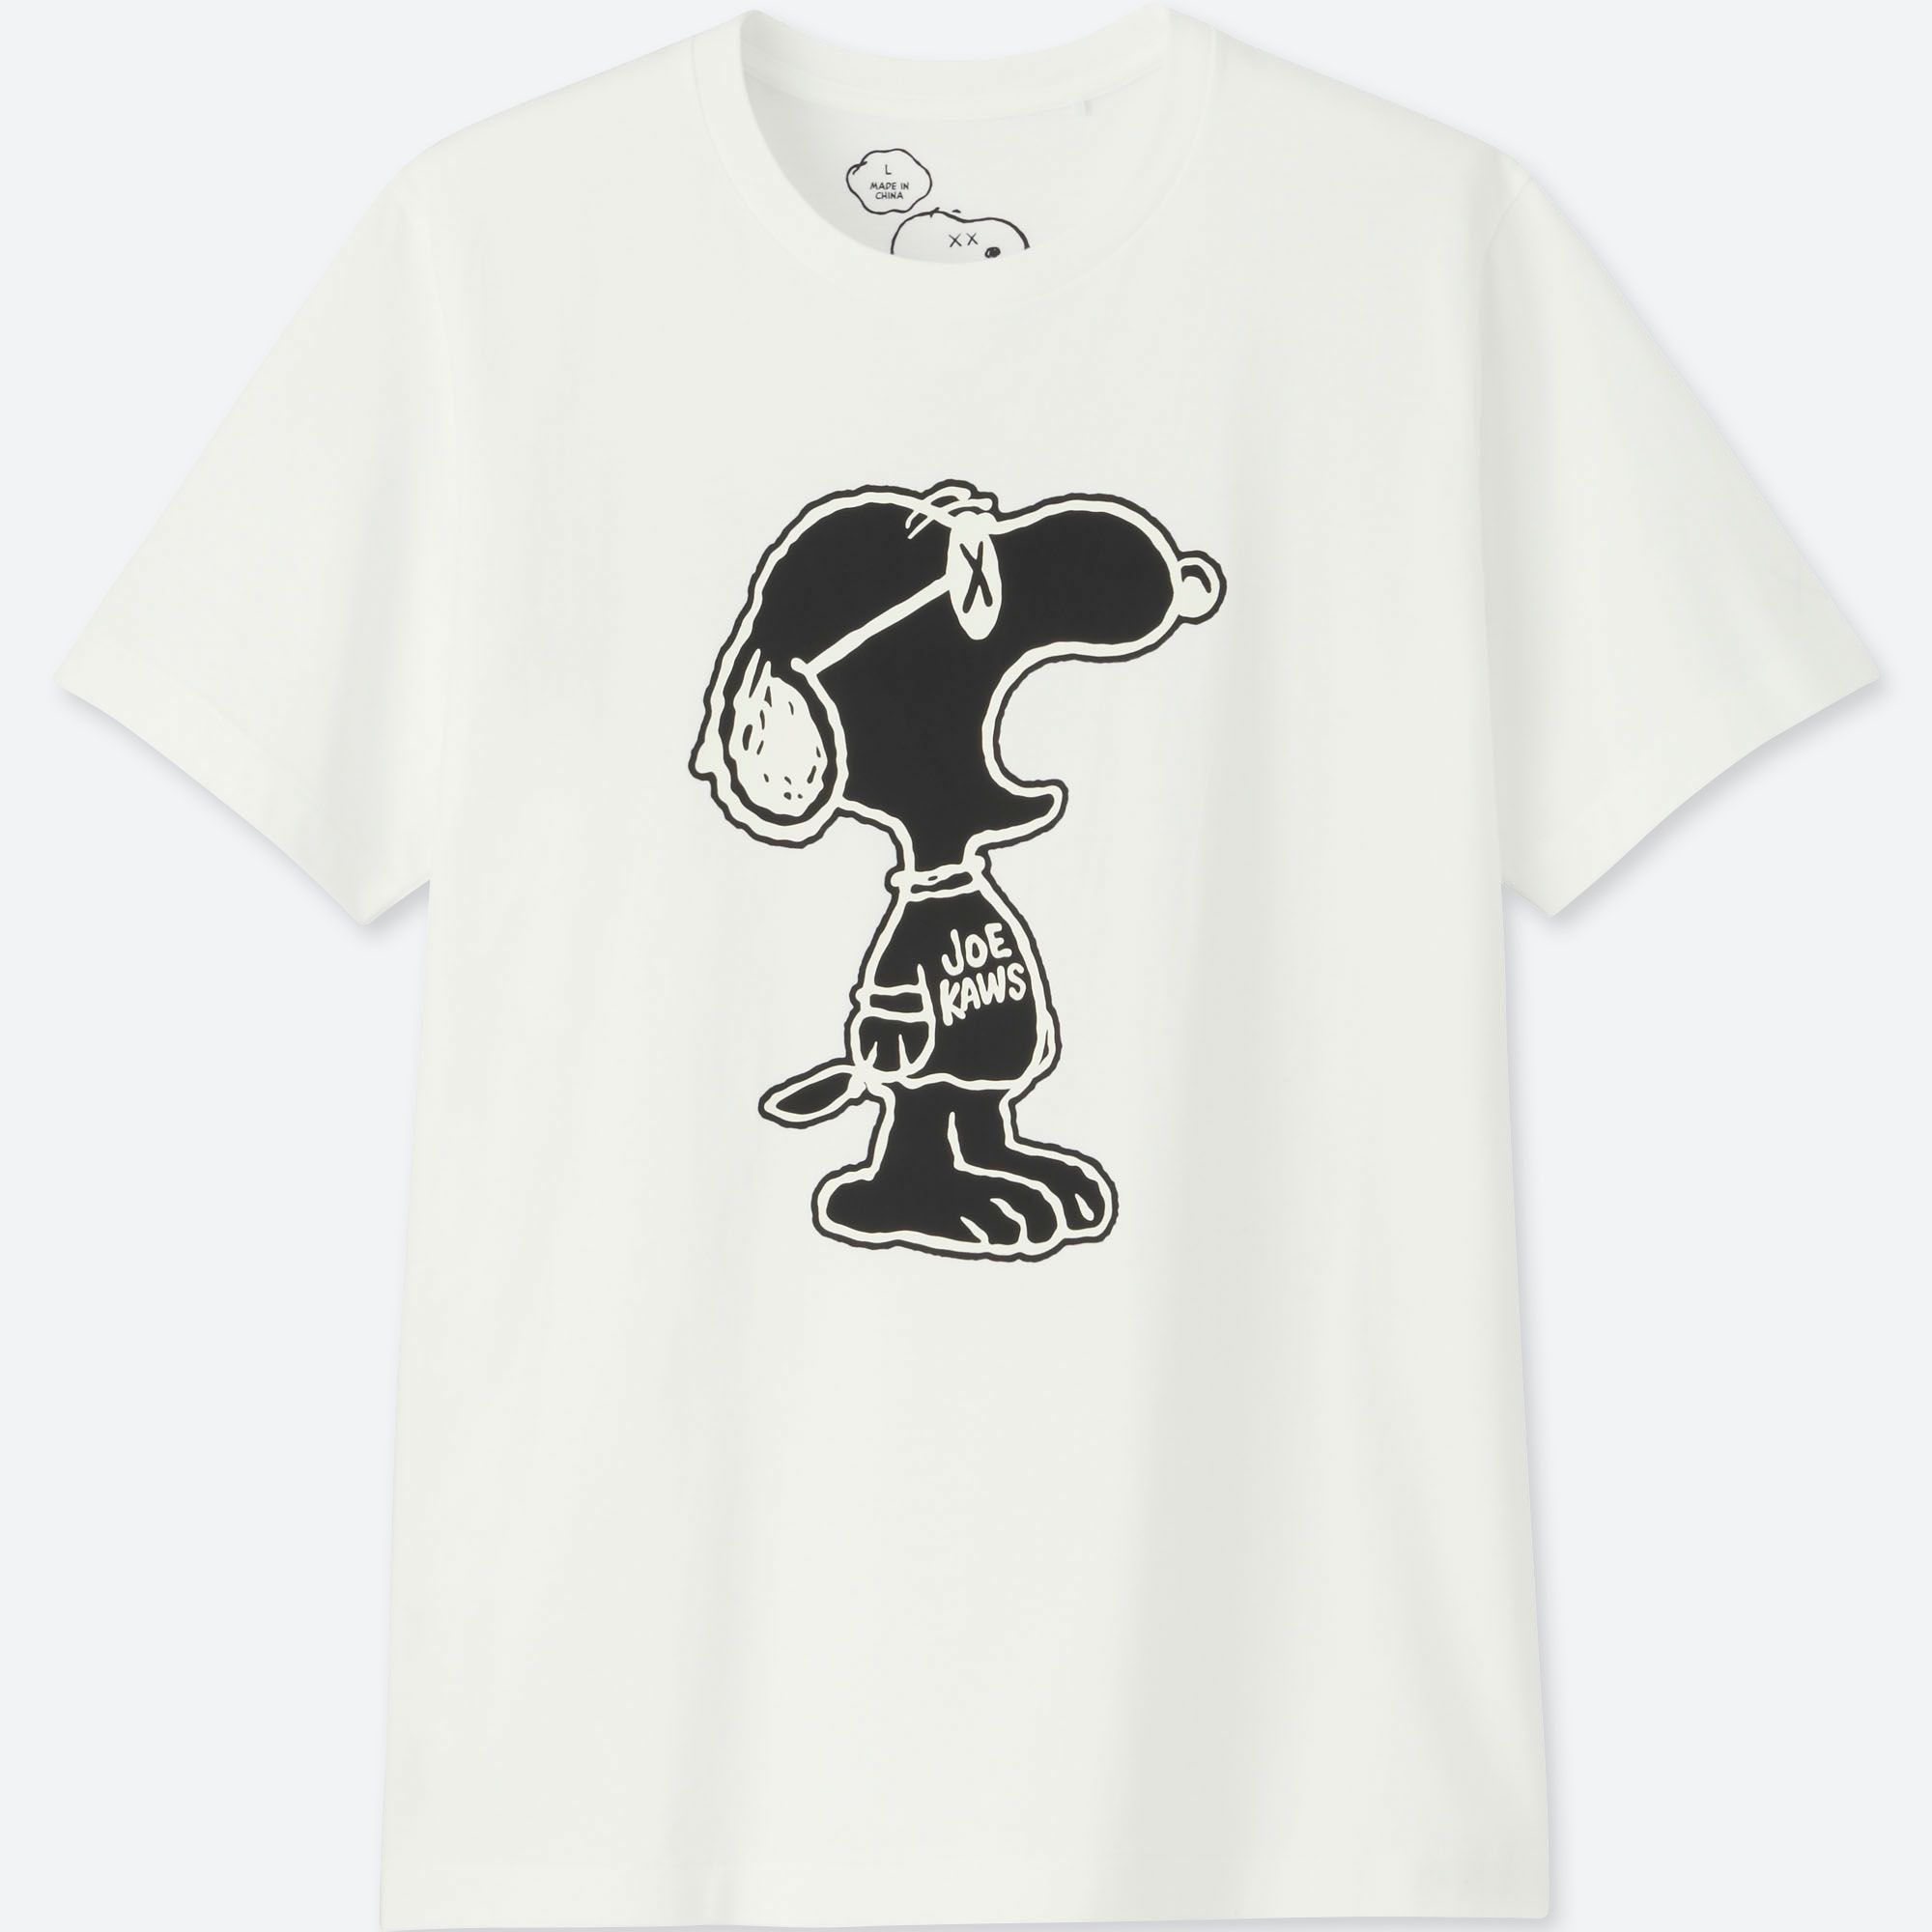 Carry Snoopy with You Wherever You Go with UNIQLO's Kaws x Peanuts Items